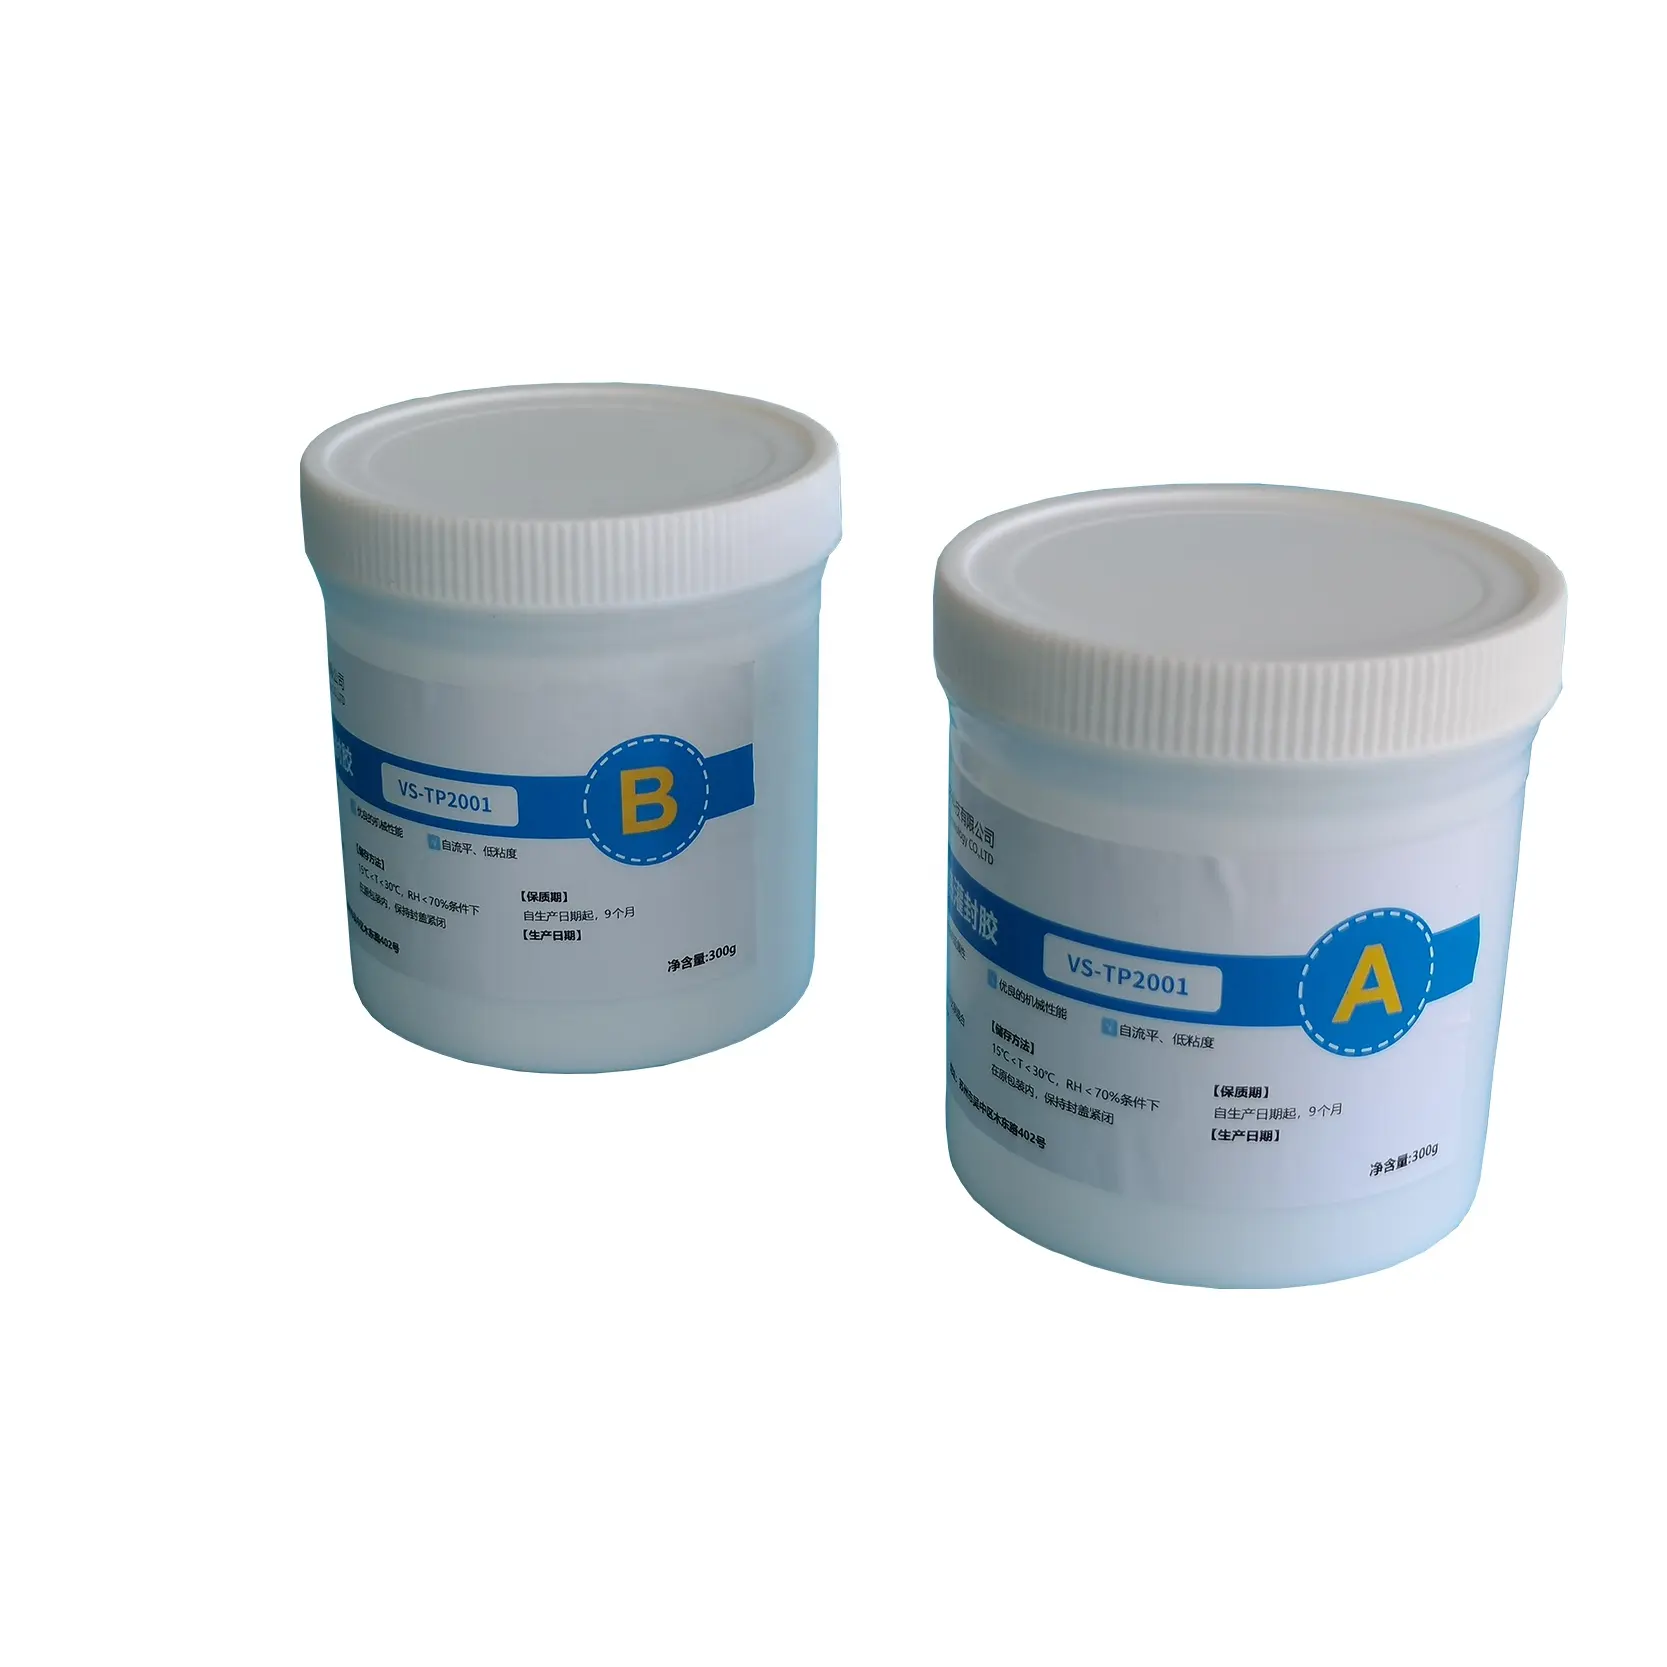 Two Components 1:1 Mixing Ratio Silicone Potting Compound AB Glue Self-leveling Silicone Potting Compound